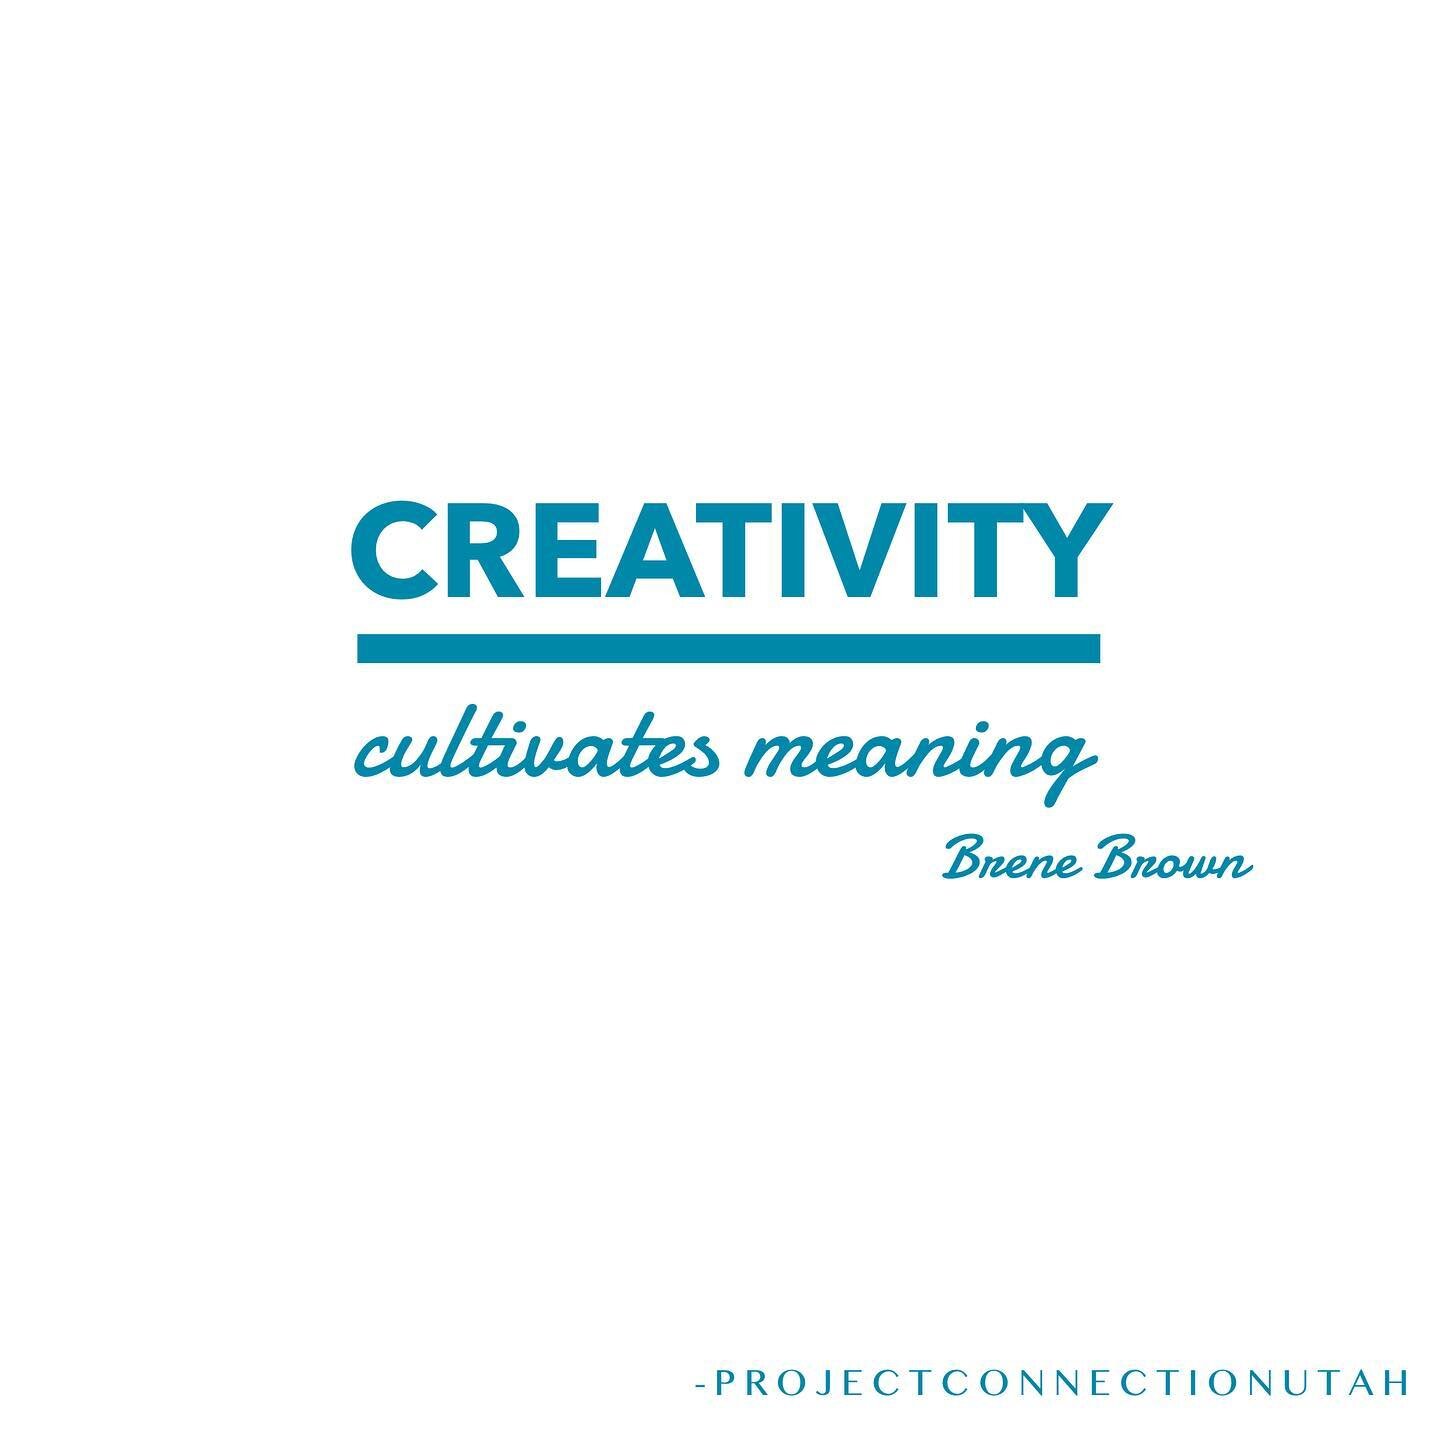 Creativity is often overlooked as a key part to wholehearted living. 
...
What is inside you that needs to be brought to life today?
...
#projectconnectionutah #ownyourstory #narrativetherapy #brenebrown #brenébrown #brenebrownquotes #shameresilienc